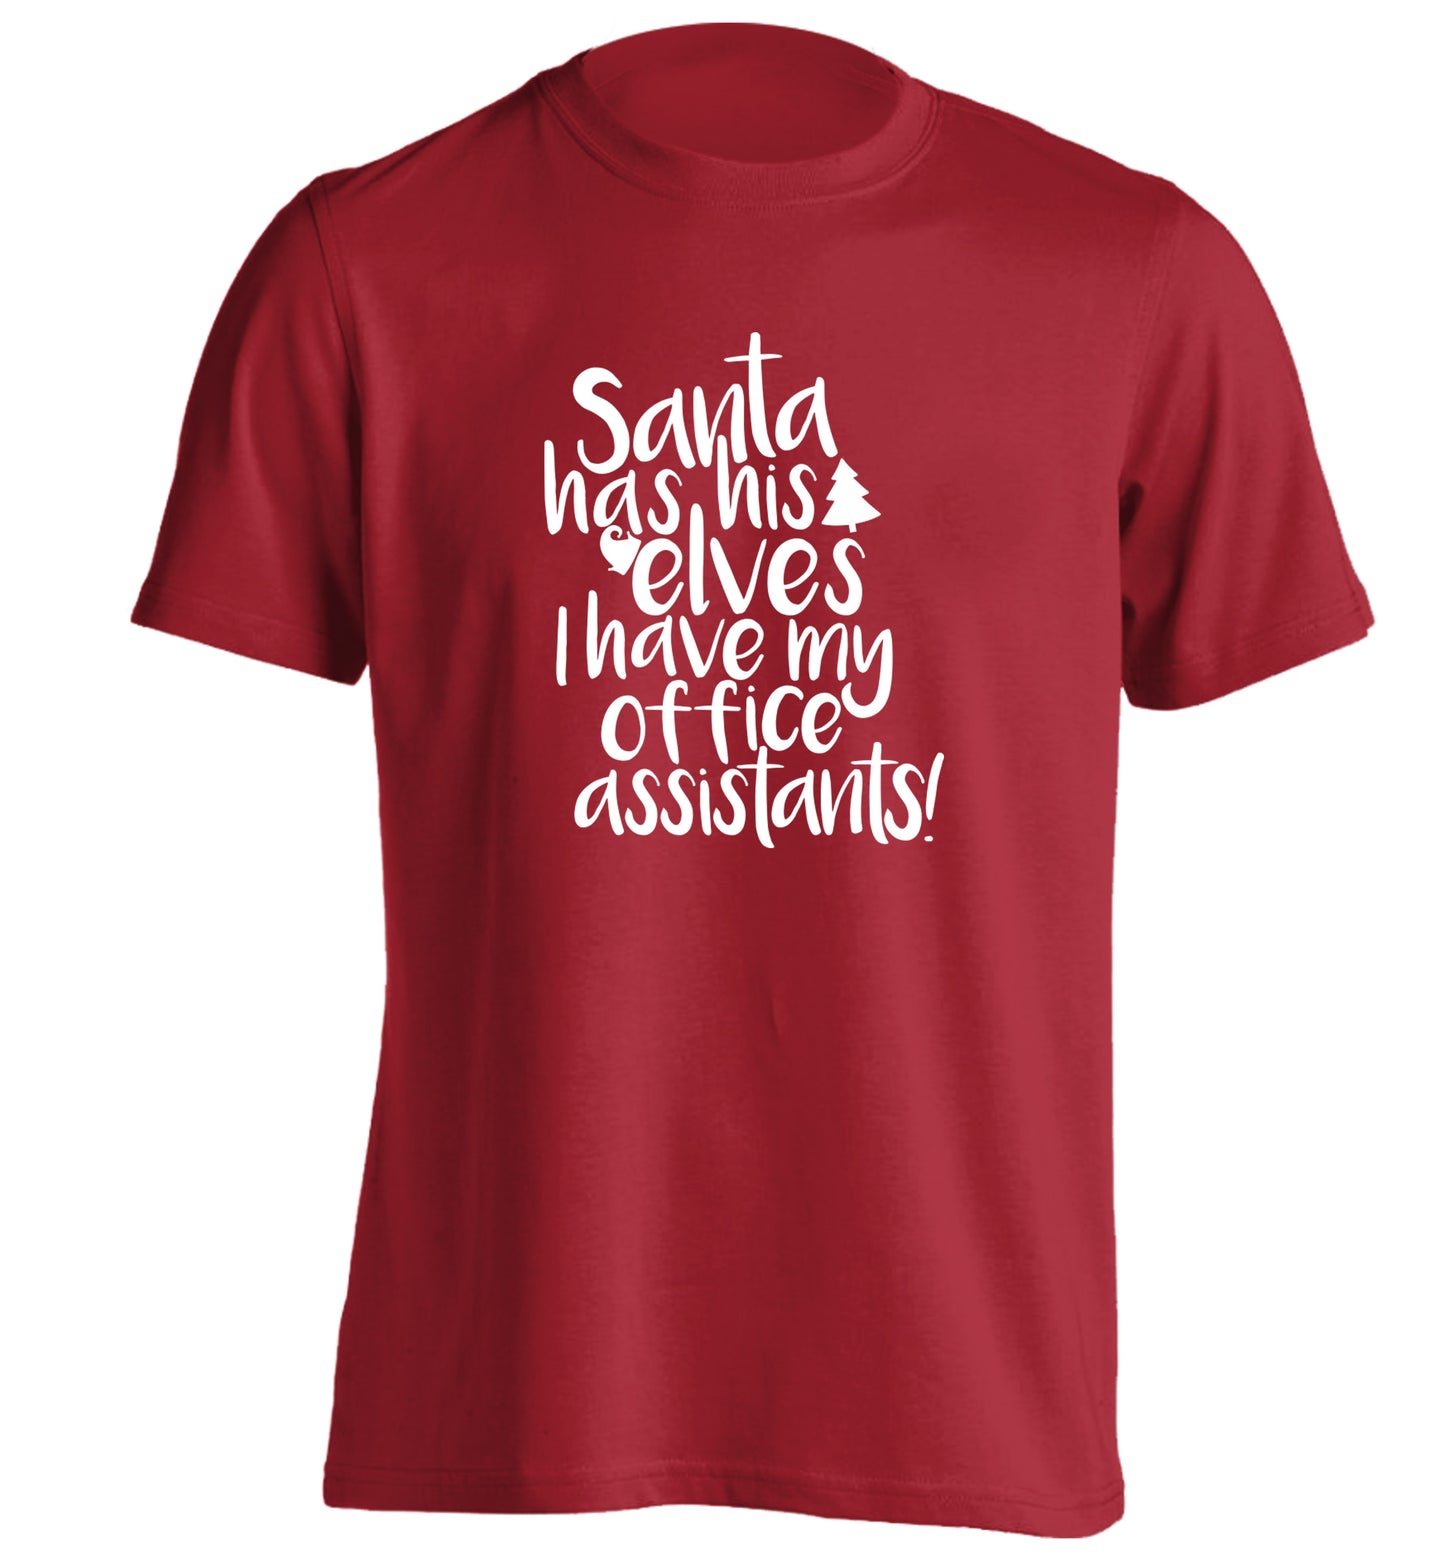 Santa has elves I have office assistants adults unisex red Tshirt 2XL